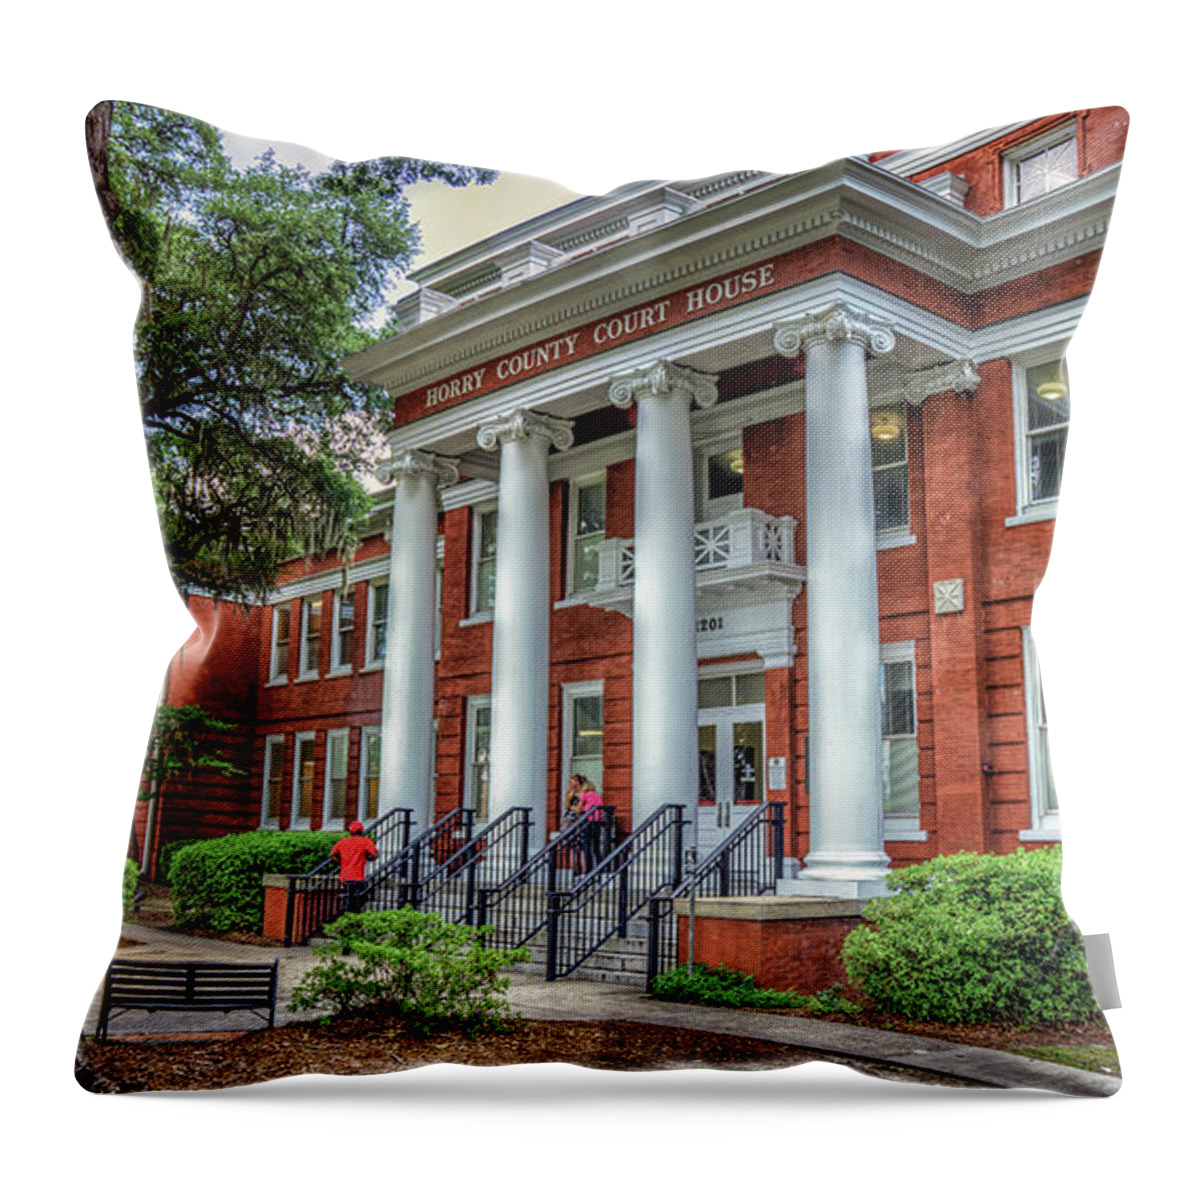 Horry County Throw Pillow featuring the photograph Horry County Court House by David Smith